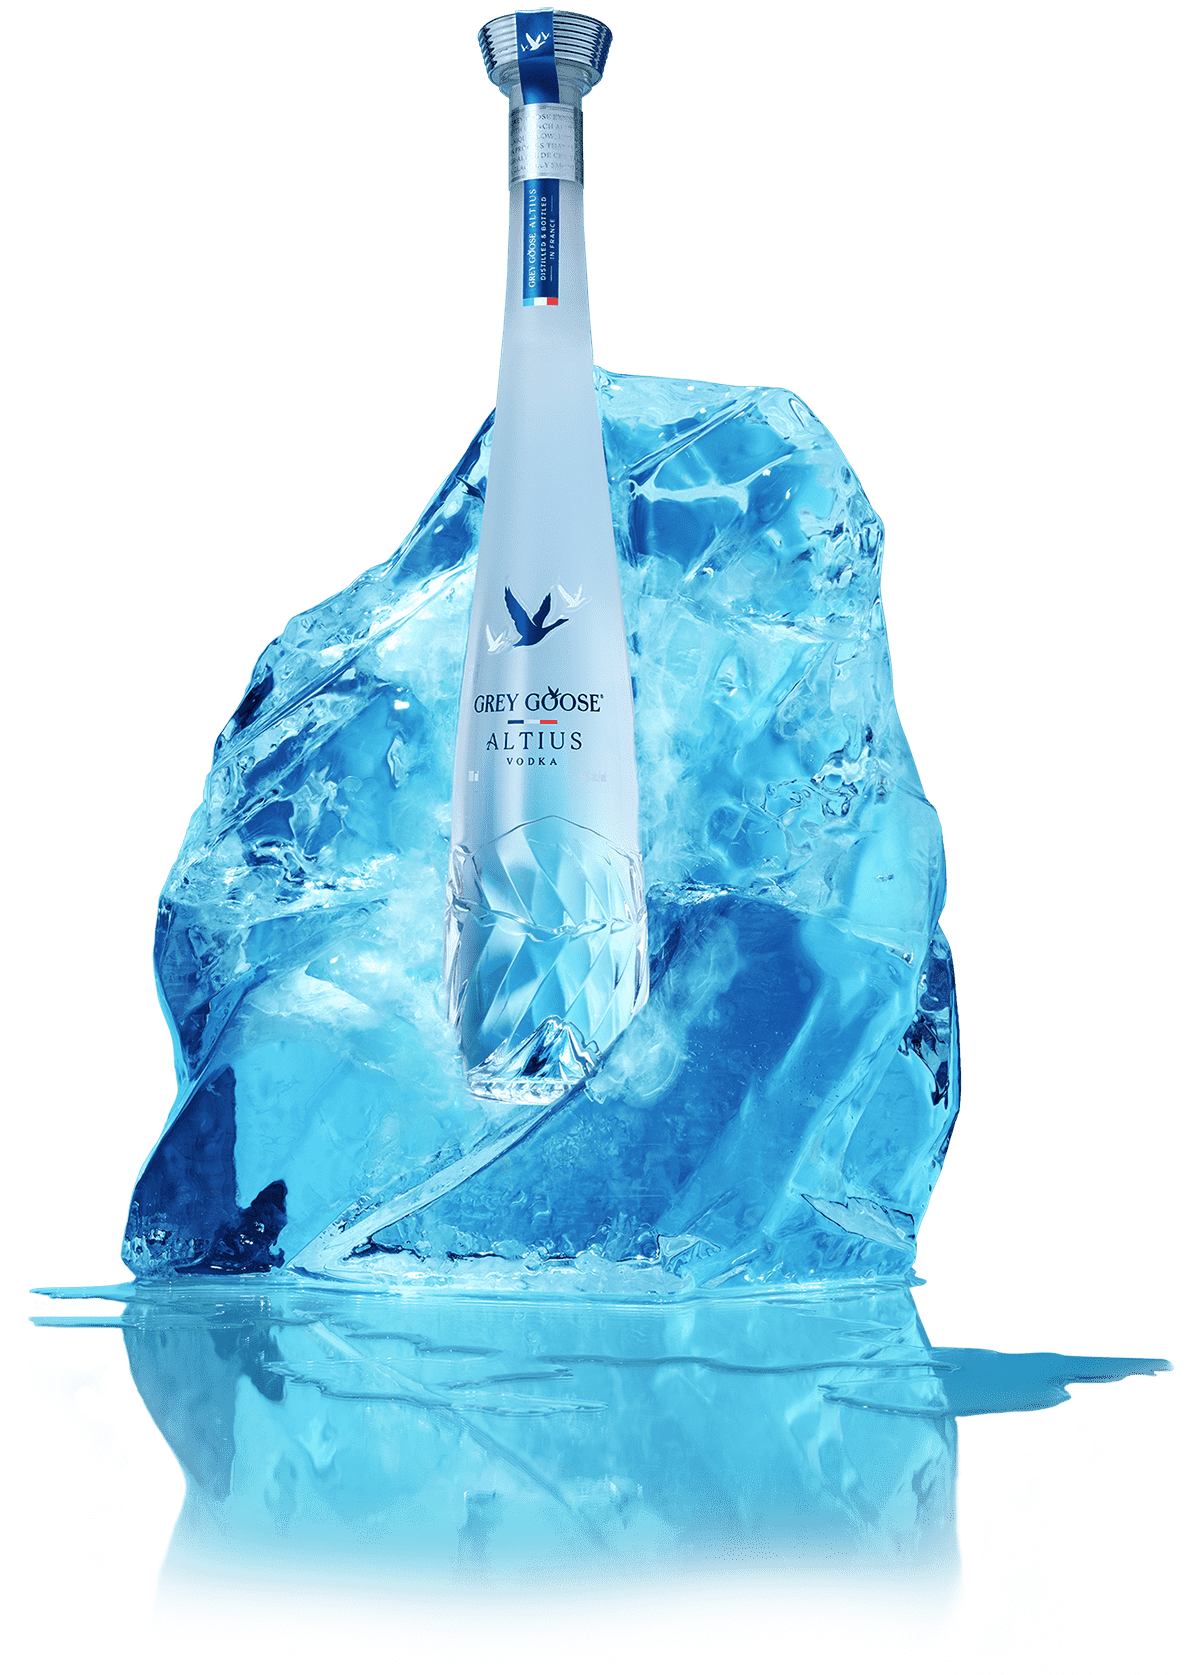 A bottle of Grey Goose Altius in a block of ice